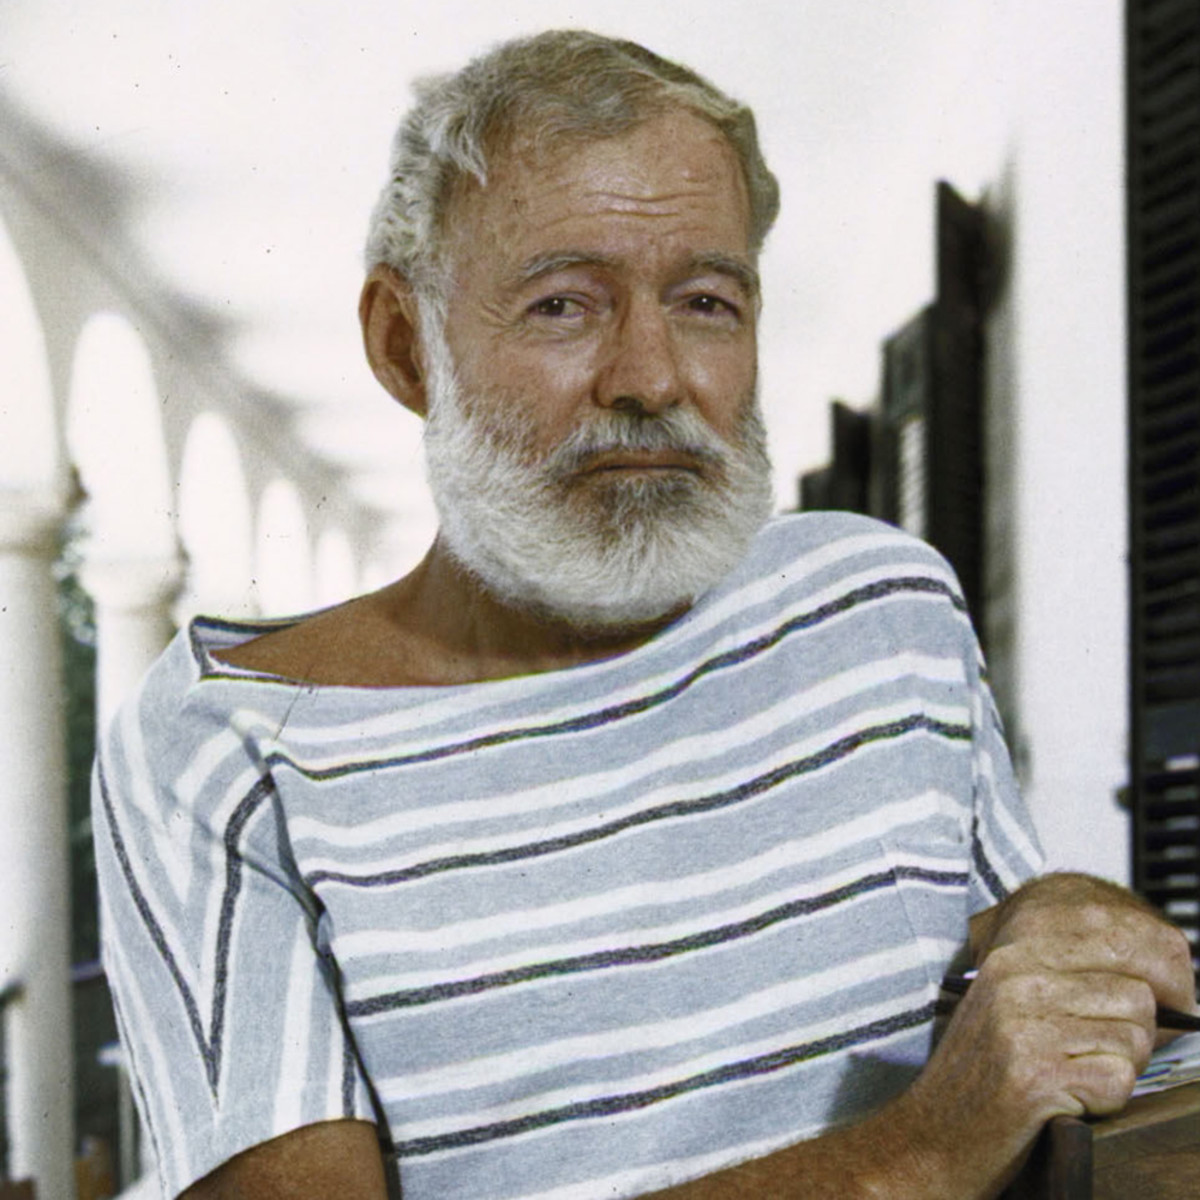 fascinating facts - Ernest Hemingway lived through anthrax, malaria, pneumonia, dysentery, skin cancer, hepatitis, anemia, diabetes, high blood pressure, two plane crashes, a ruptured kidney, a ruptured spleen, a ruptured liver, a crushed vertebra, and a 